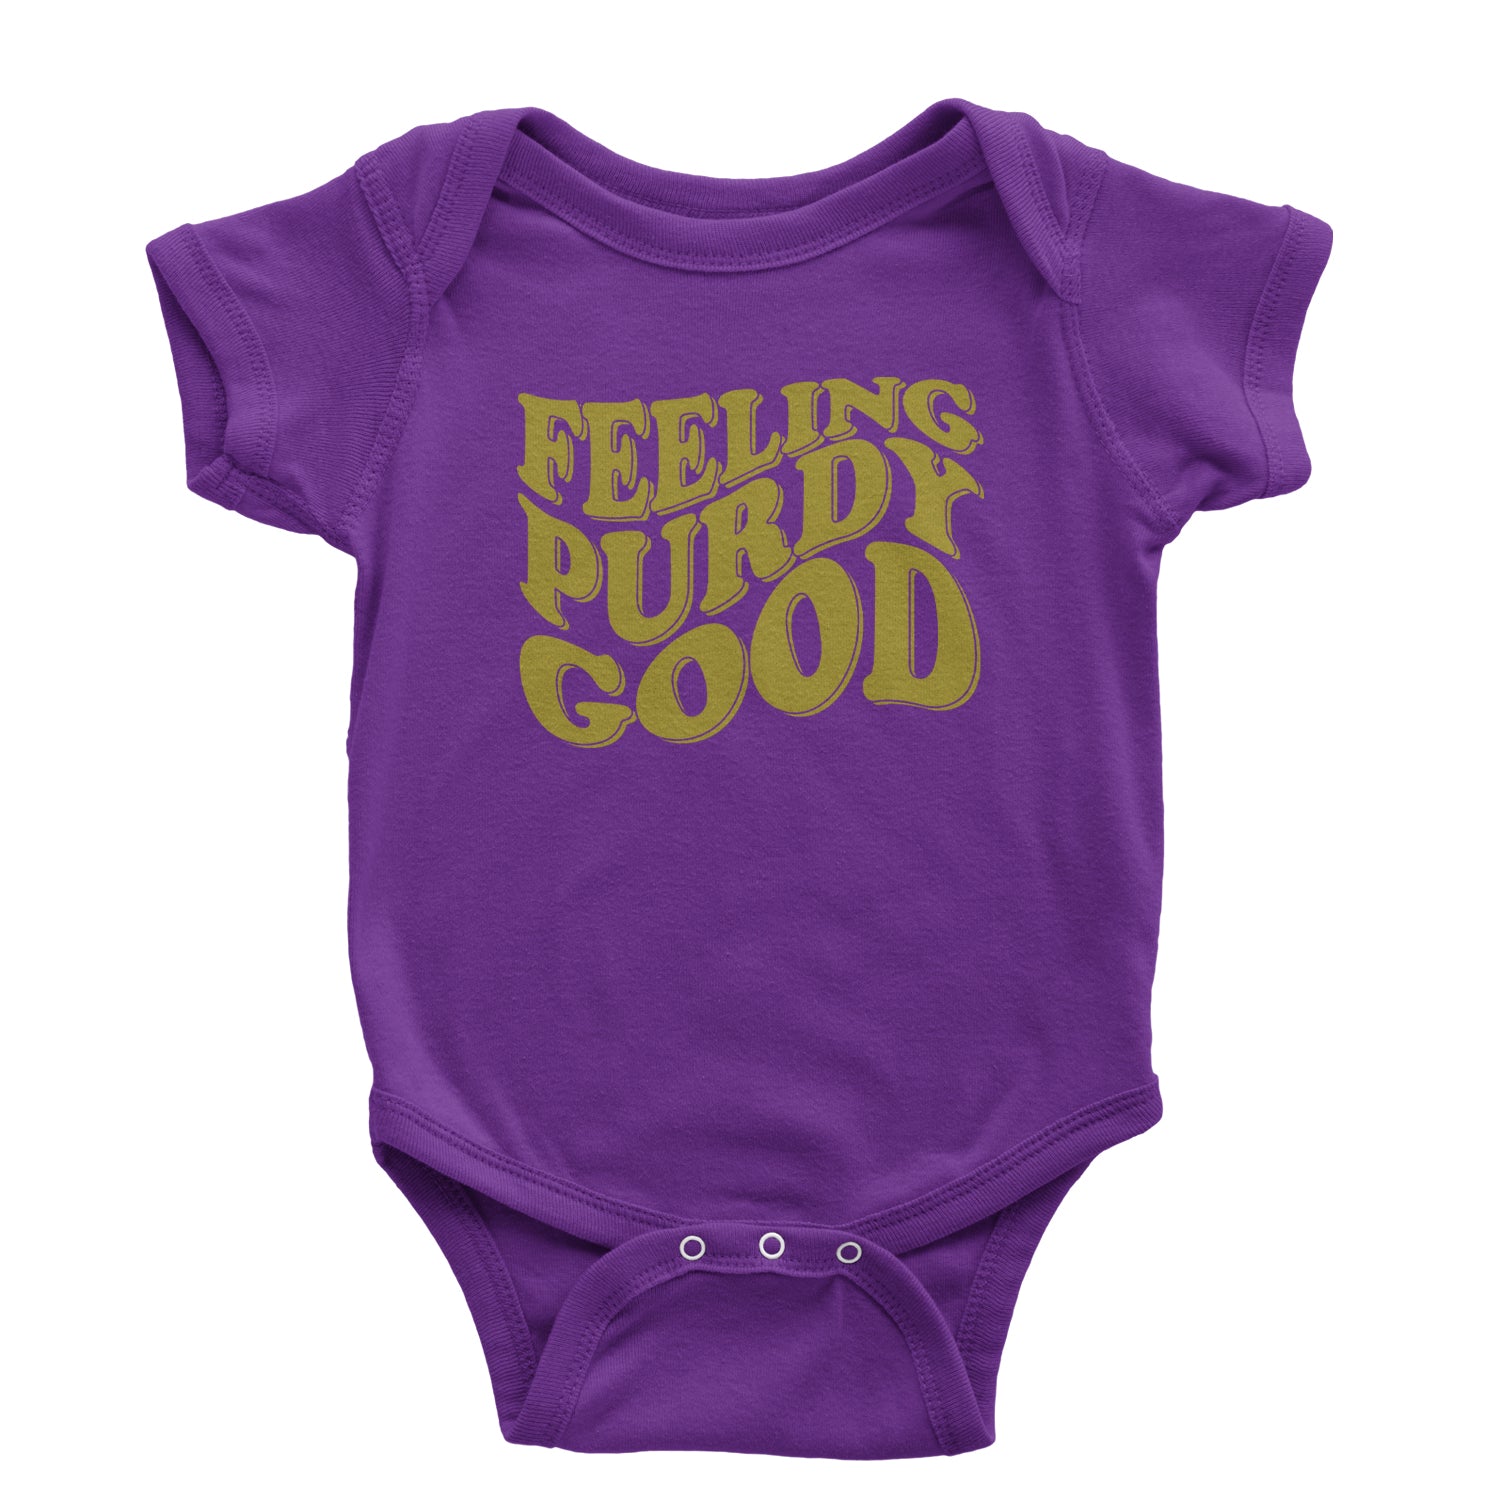 Feeling Purdy Good Infant One-Piece Romper Bodysuit and Toddler T-shirt 13, football by Expression Tees